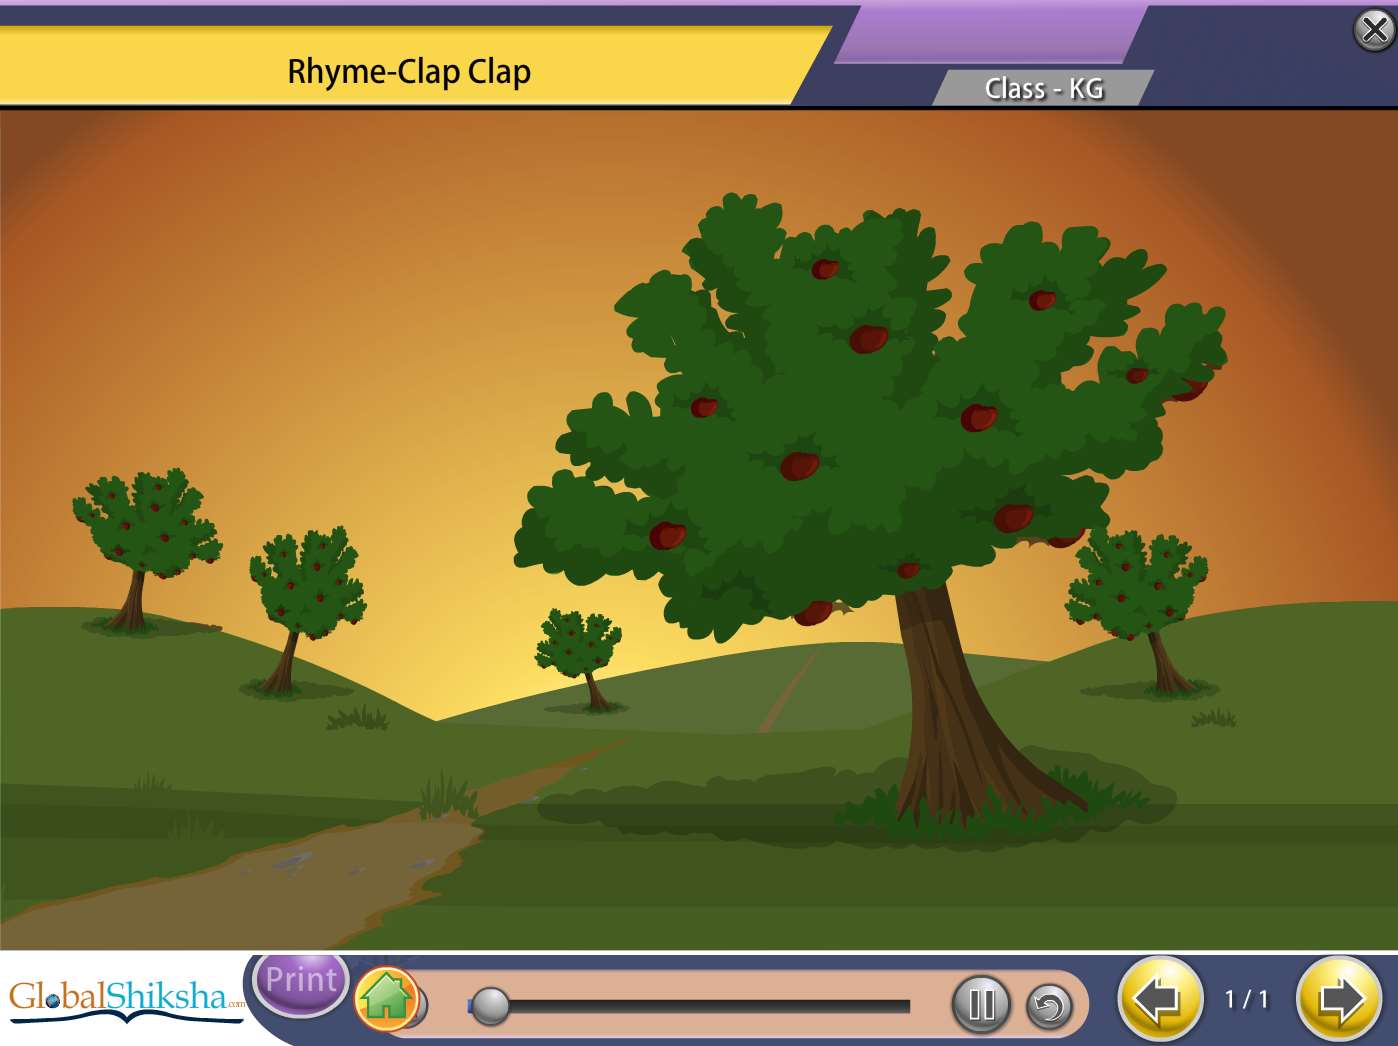 ICSE KG General knowledge, Stories & Rhymes Animated Pendrive in English